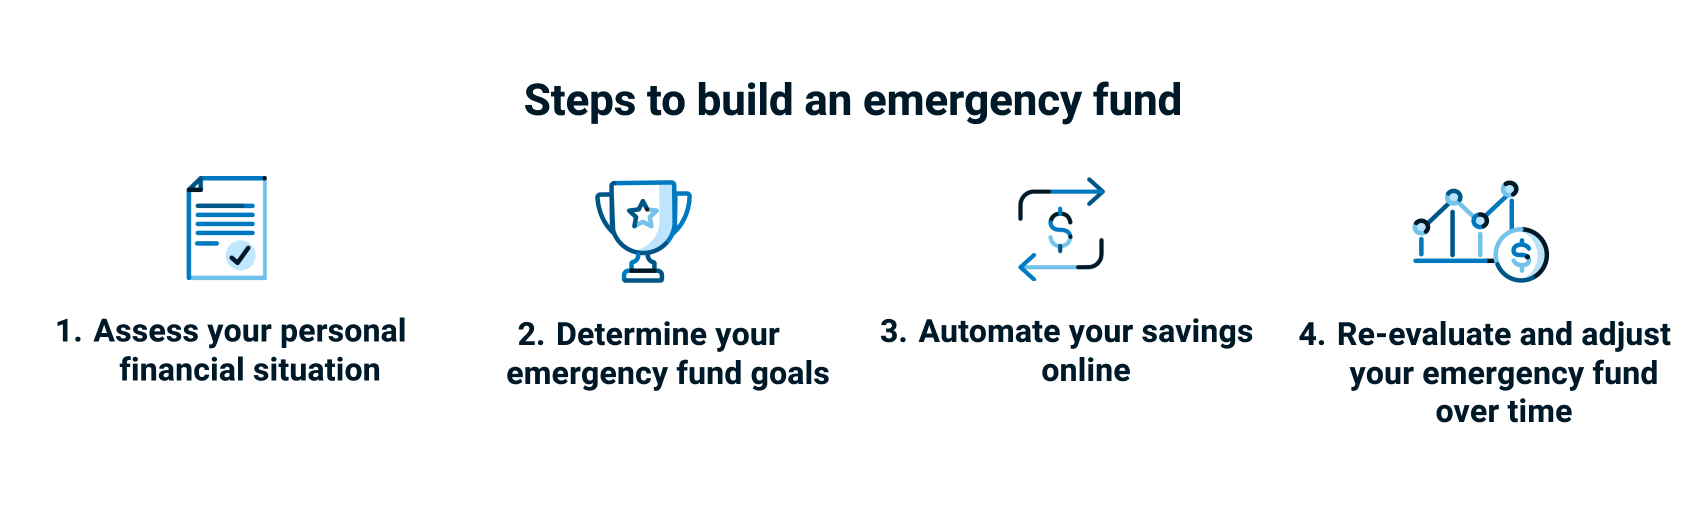 an infographic of the four steps to build an Emergency fund. Step 1 assess your personal finances. Step 2 determine your goals. Step 3 automate your savings. Step 4 re-evaluate and adjust over time